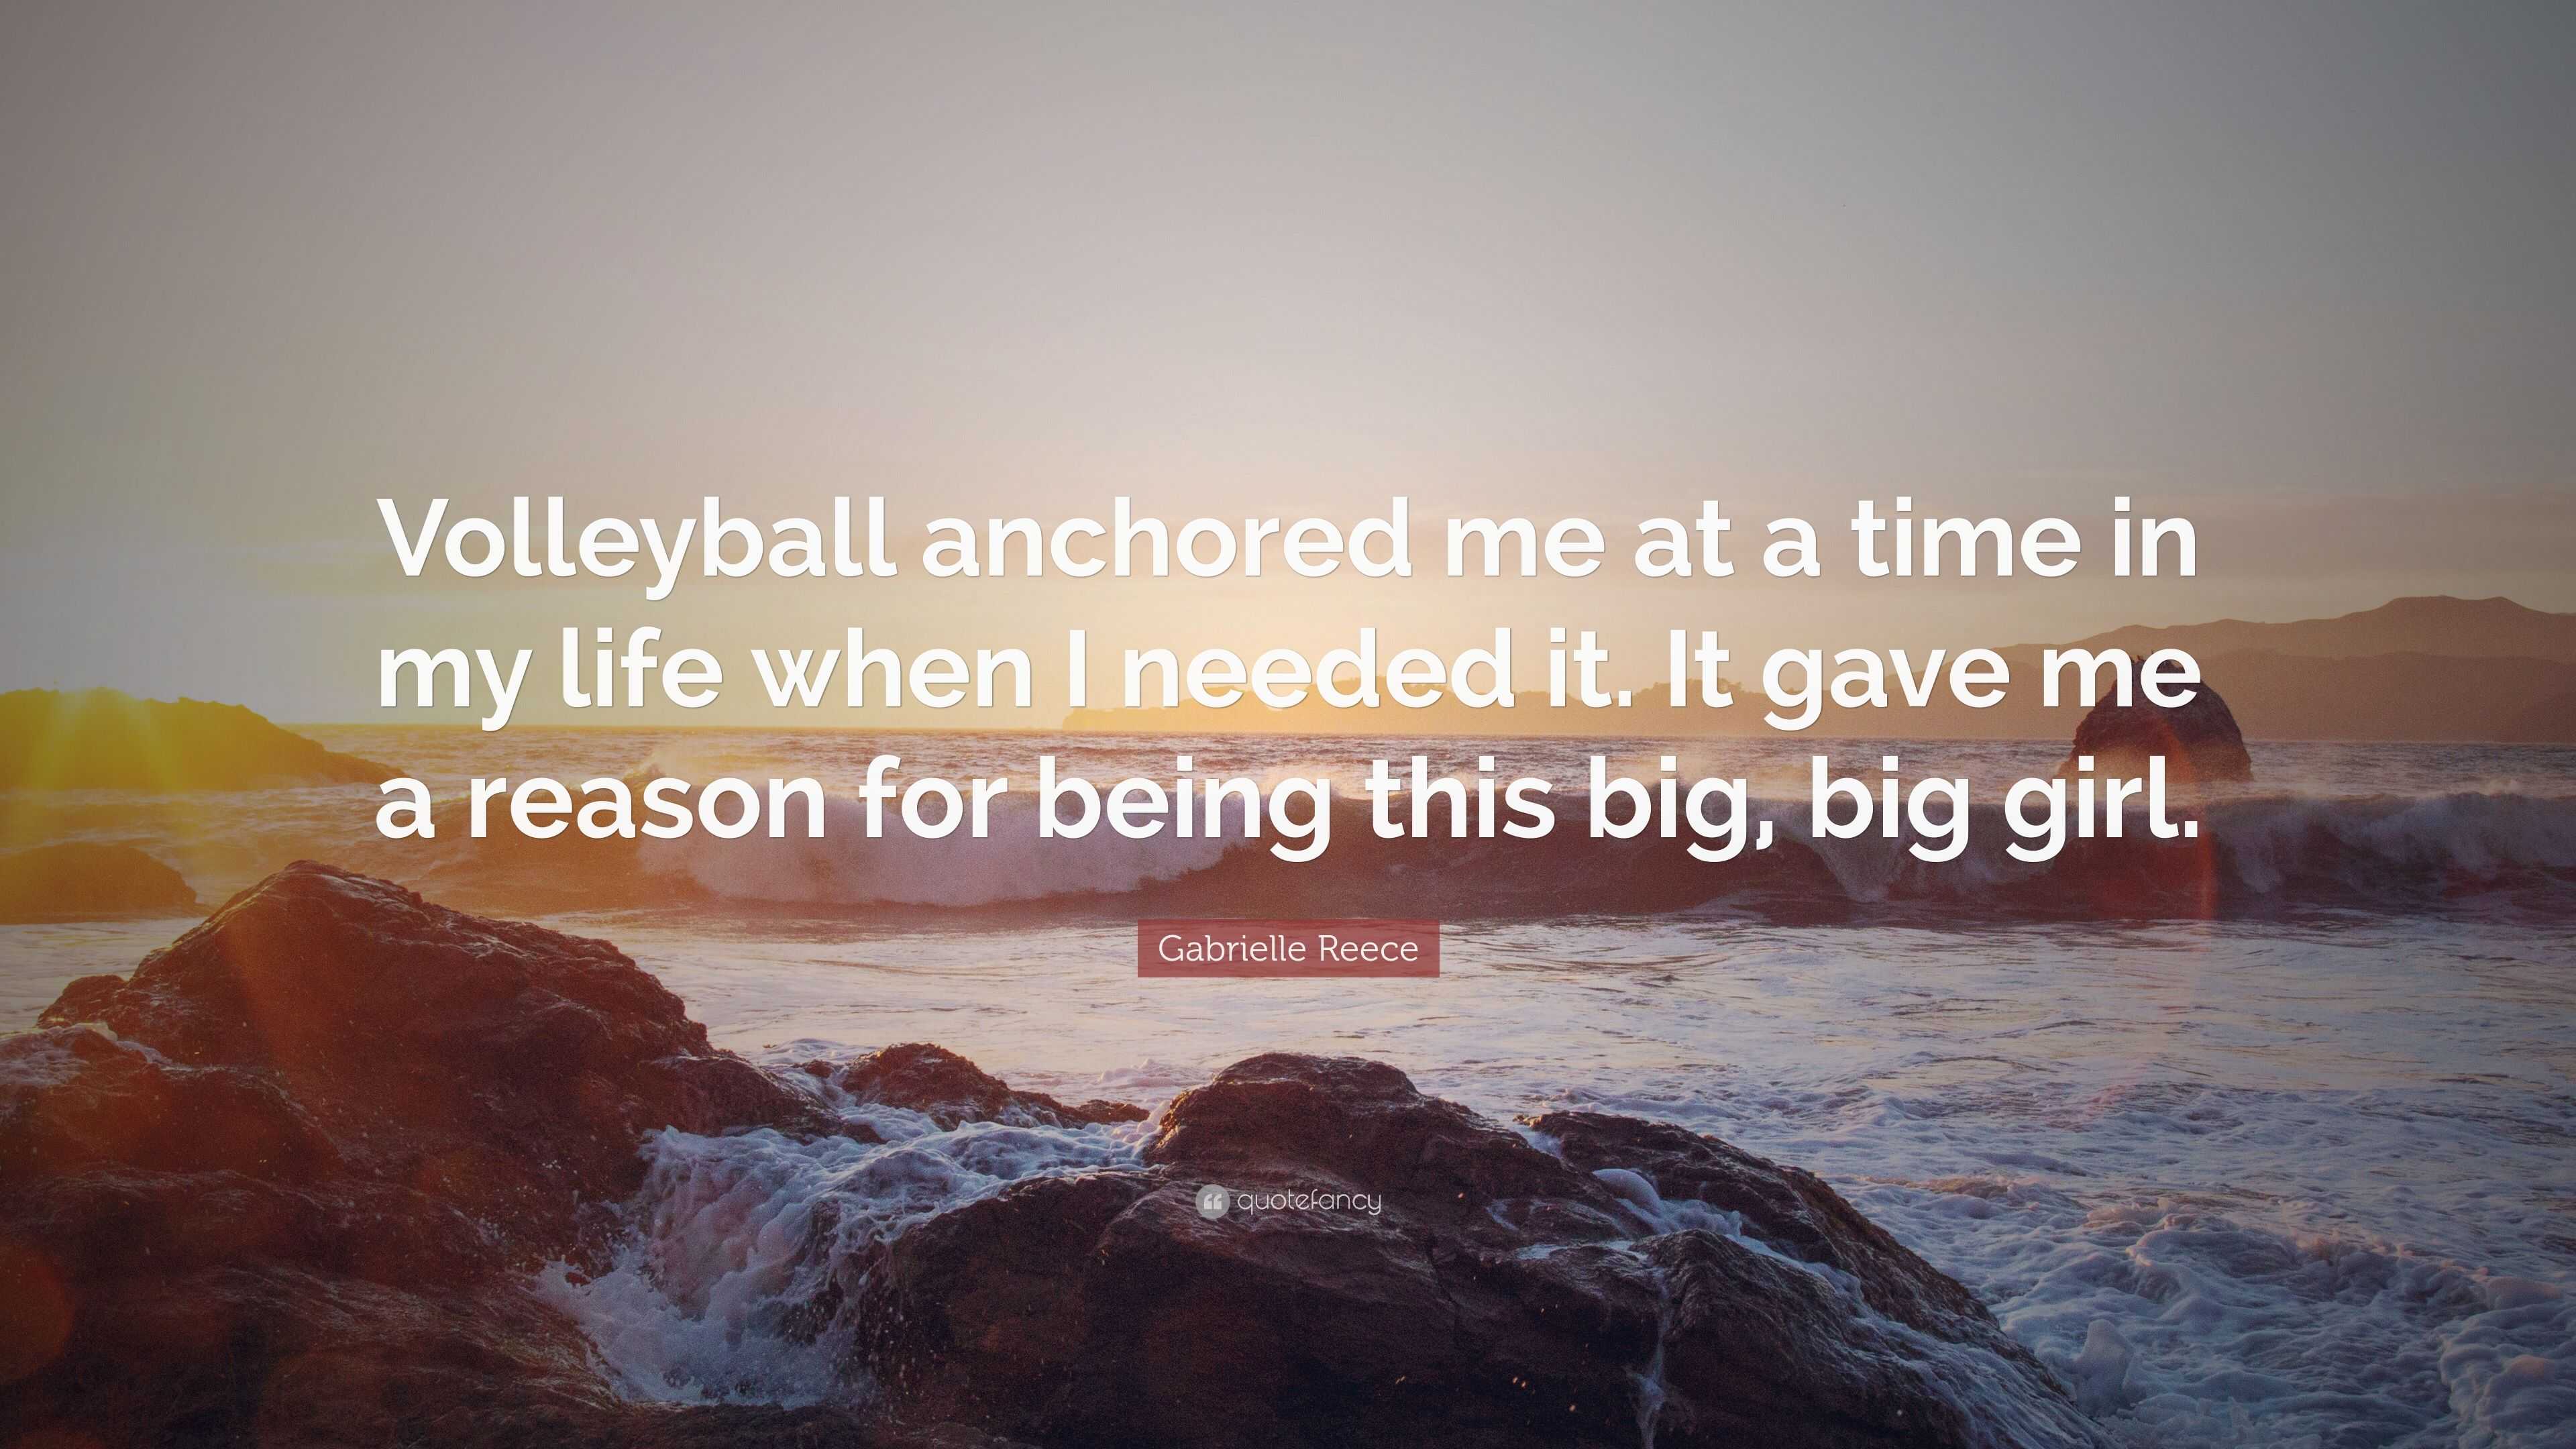 Gabrielle Reece Quote: “Volleyball anchored me at a time in my life ...